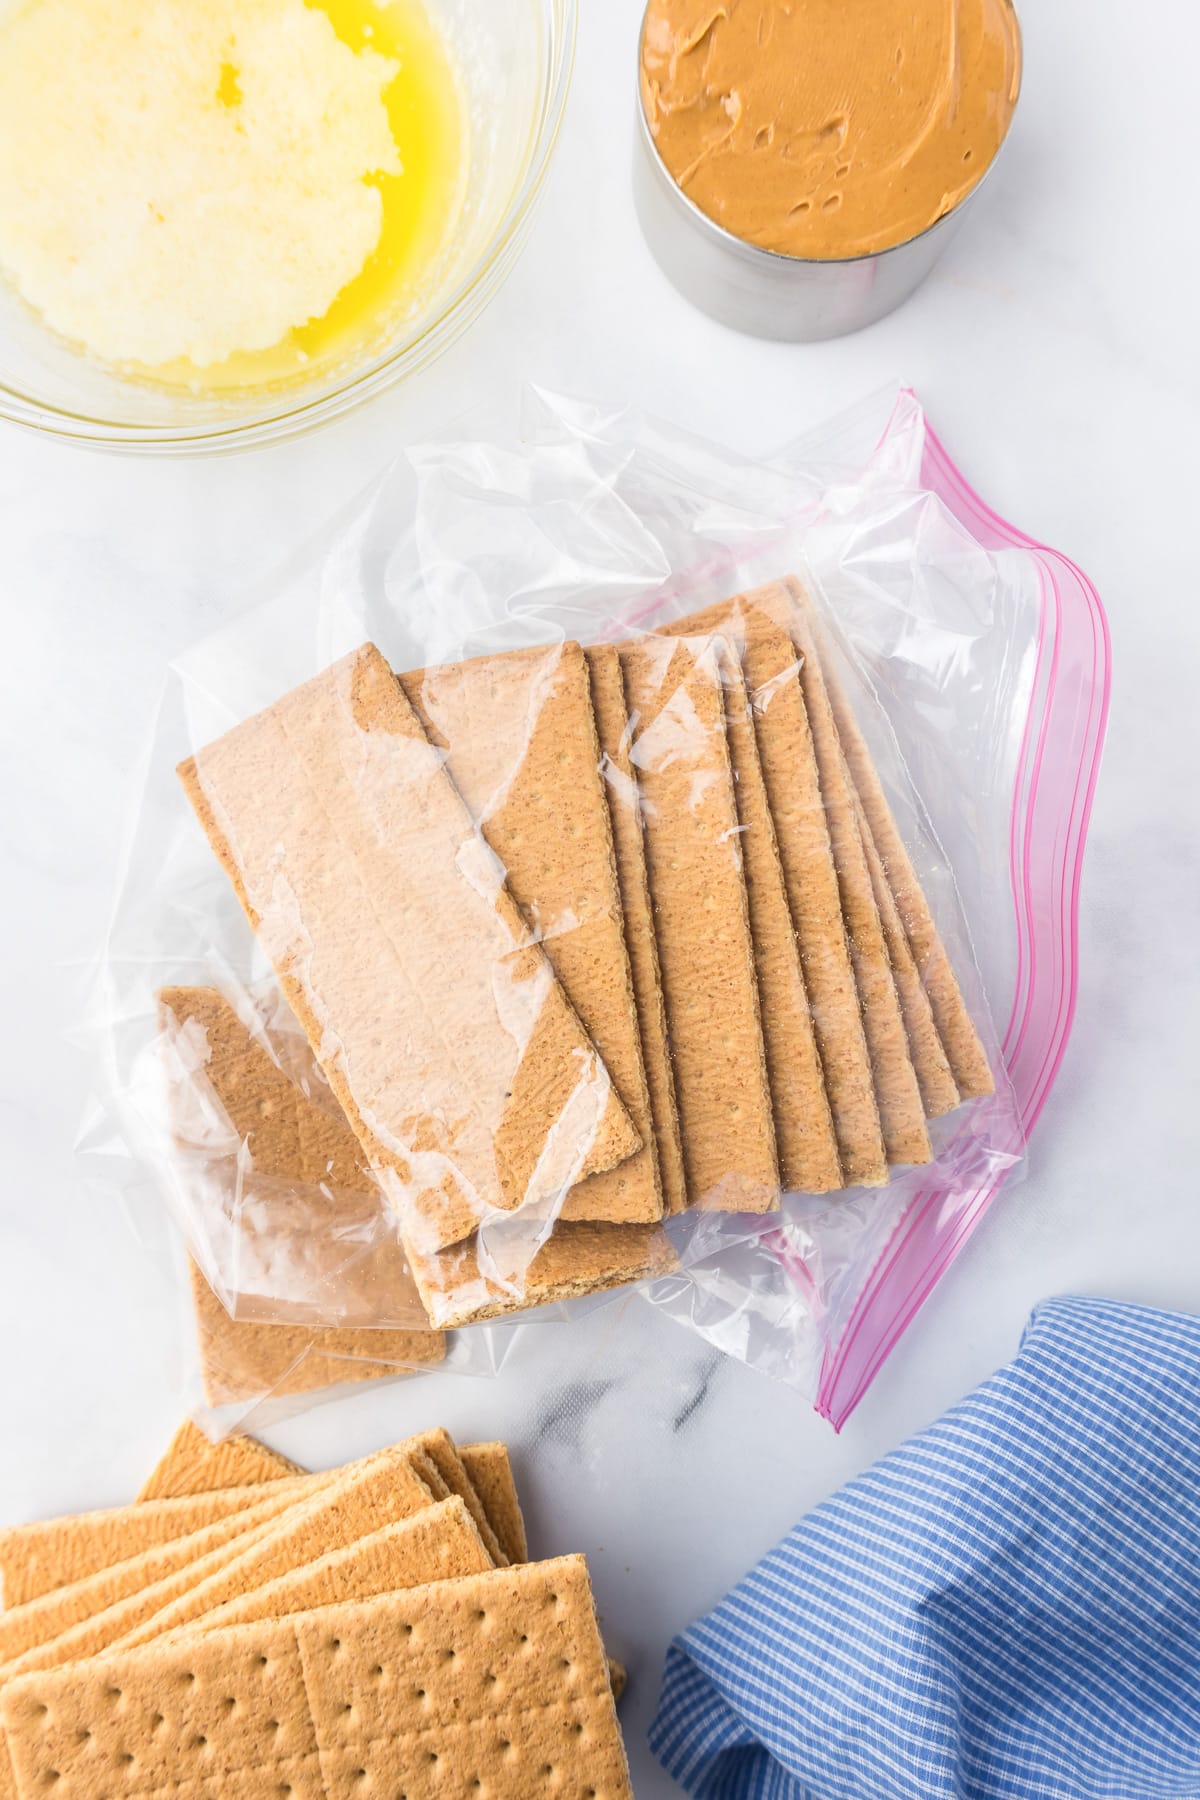 Graham crackers in a large ziplock bag from above with peanut butter and melted butter in bowls nearby on the counter from overhead.